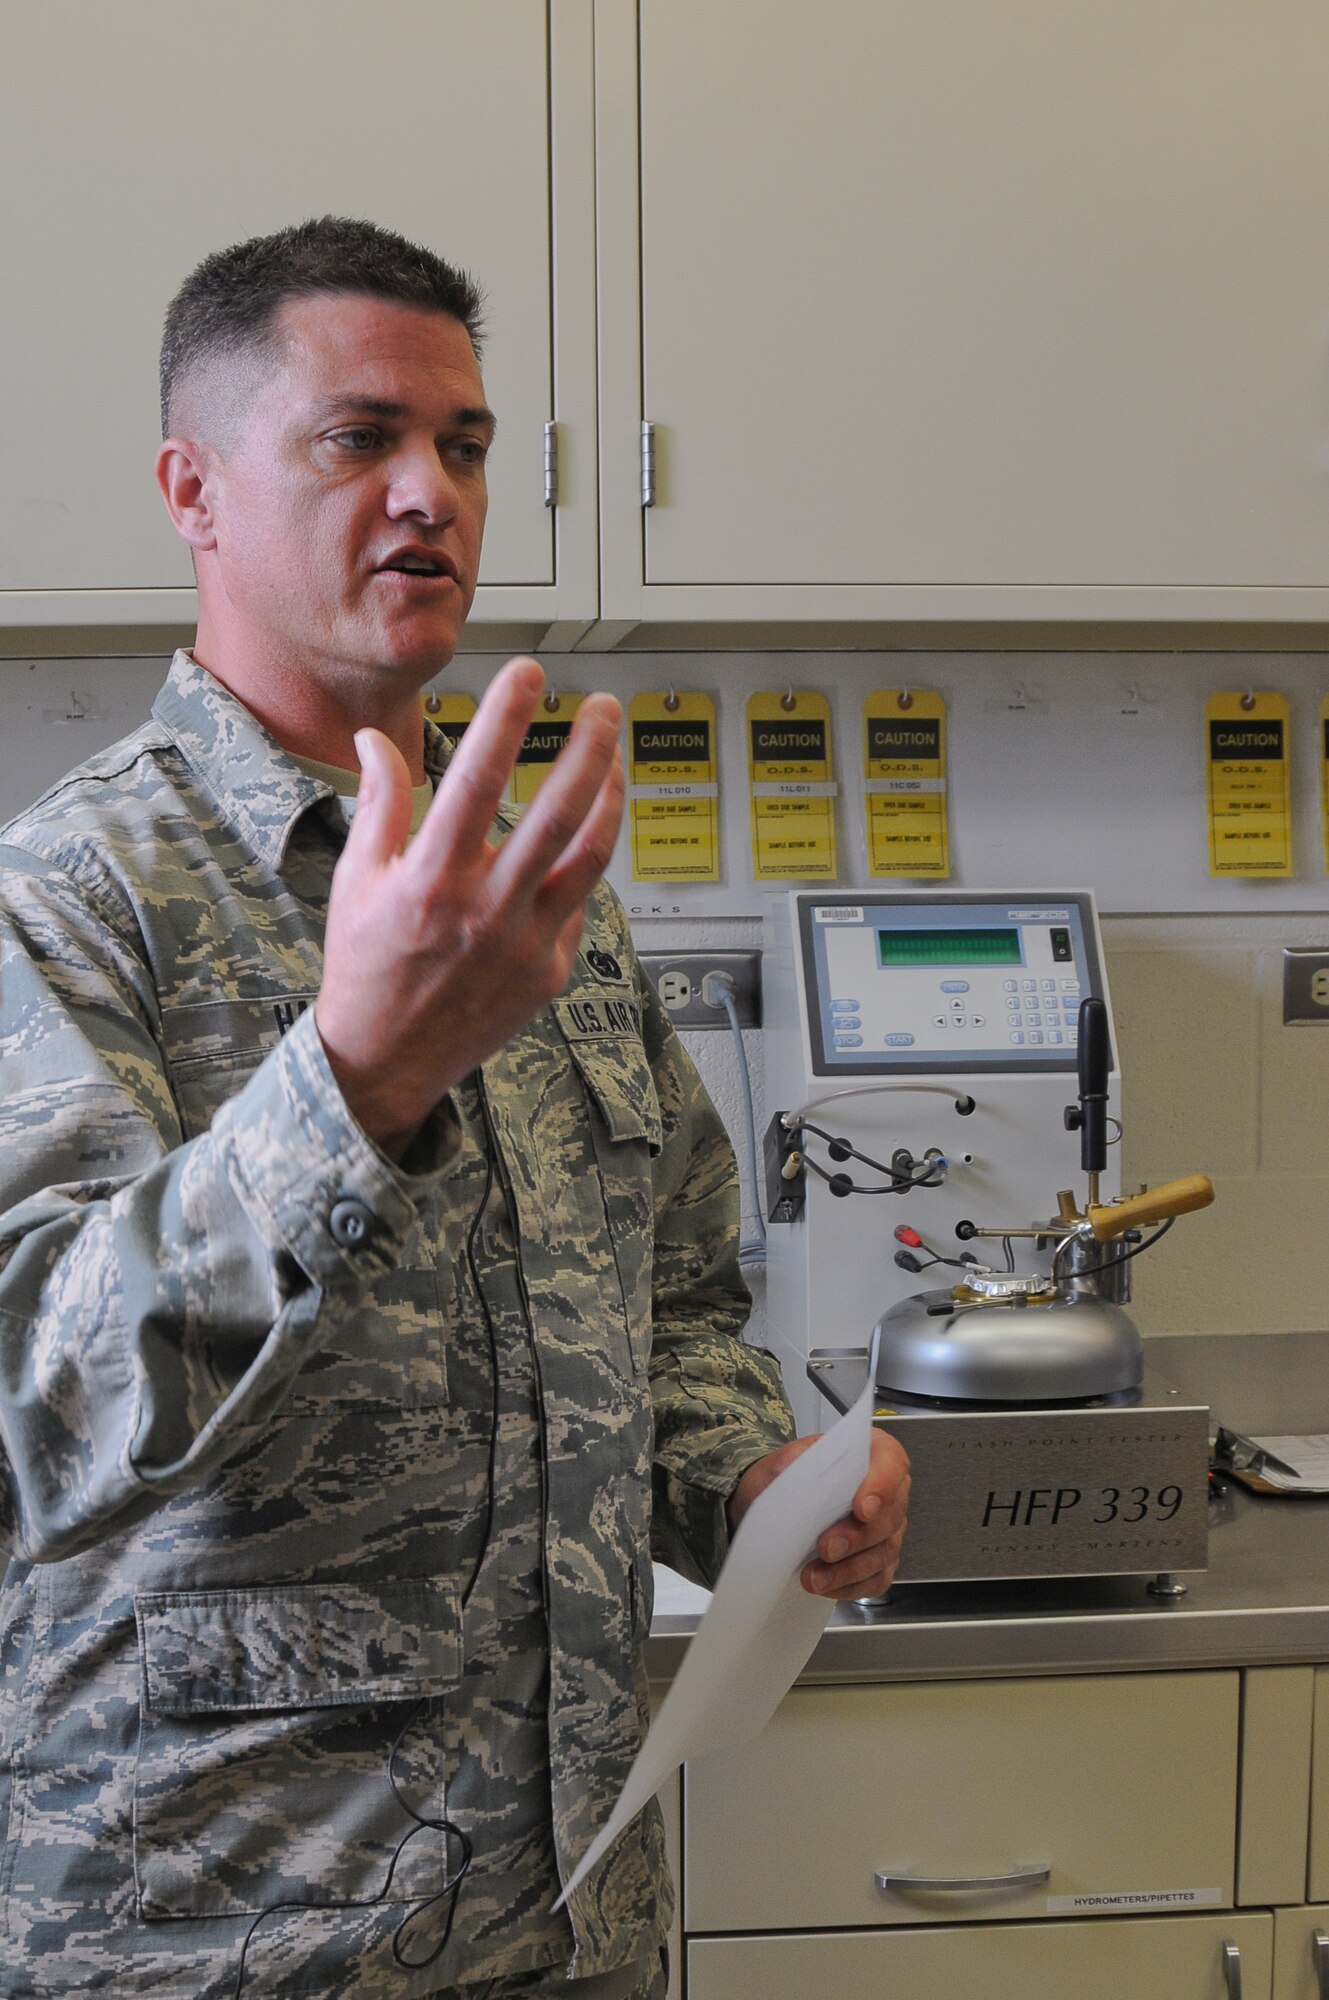 Tech. Sgt. Brian Hain, Fuels Technician, thoroughly describes the JP-8 jet fuel testing and filtration process all the way from the pipeline source to fueling the jets on the flight line at the 124th Fighter Wing Logistics Readiness Squadron open house at Gowen Field July 13. The routine testing saved equipment and possibly lives in 2009 when fuel contaminants were discovered and flying operations were halted until the source was identified and contaminants were cleared. (Air National Guard Photo by Tech. Sgt. Sarah Pokorney)